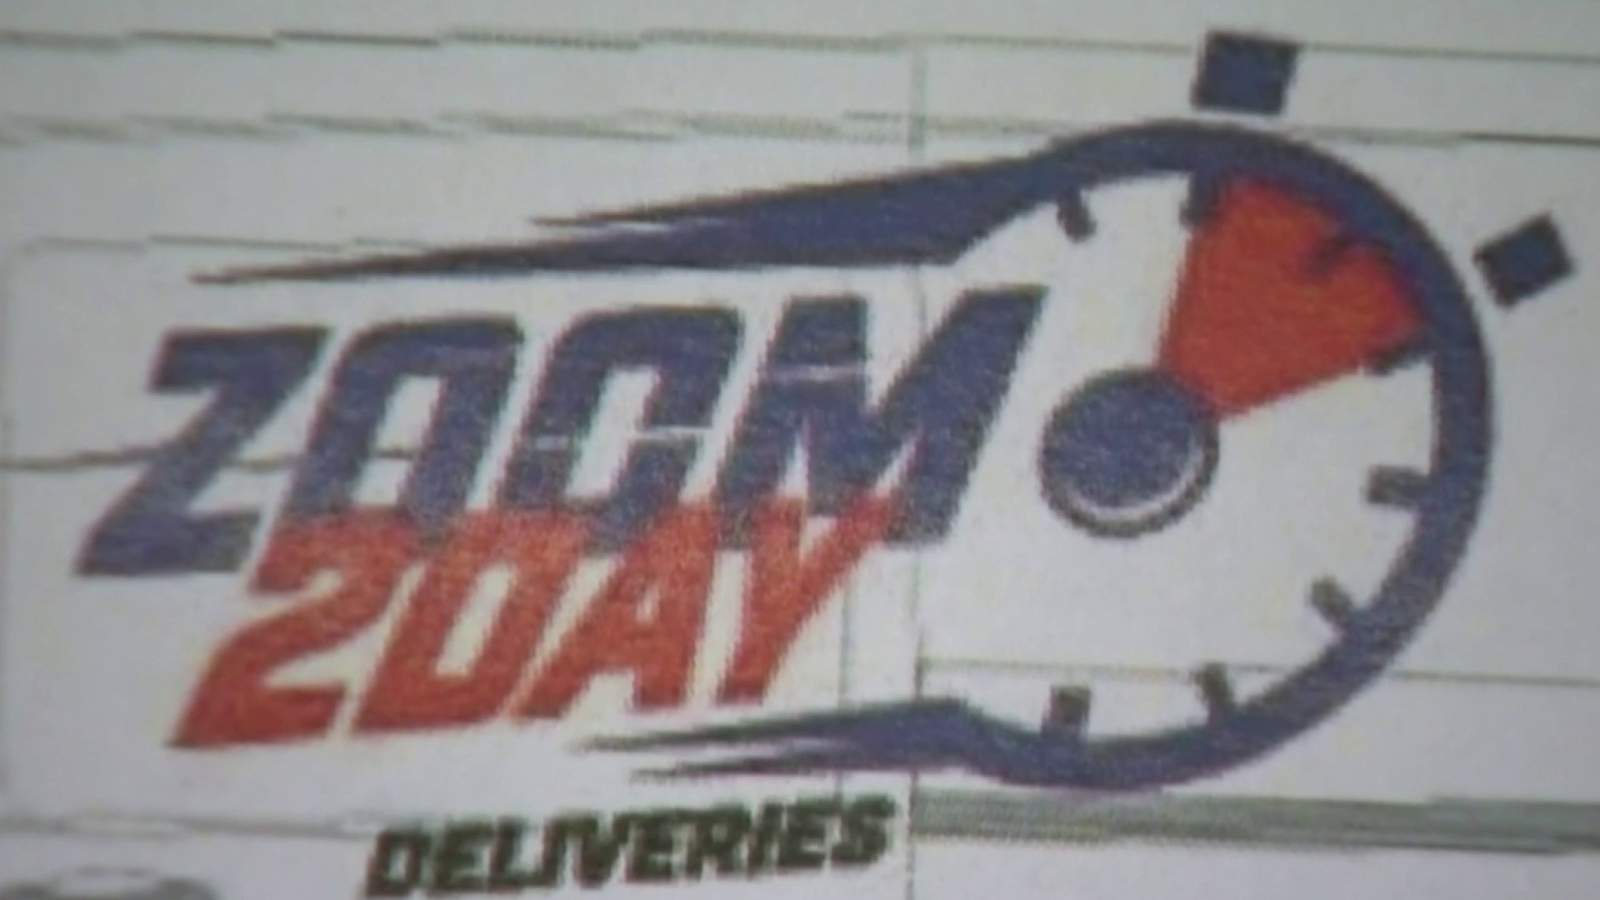 Detroiters aim to change home-delivery with new business